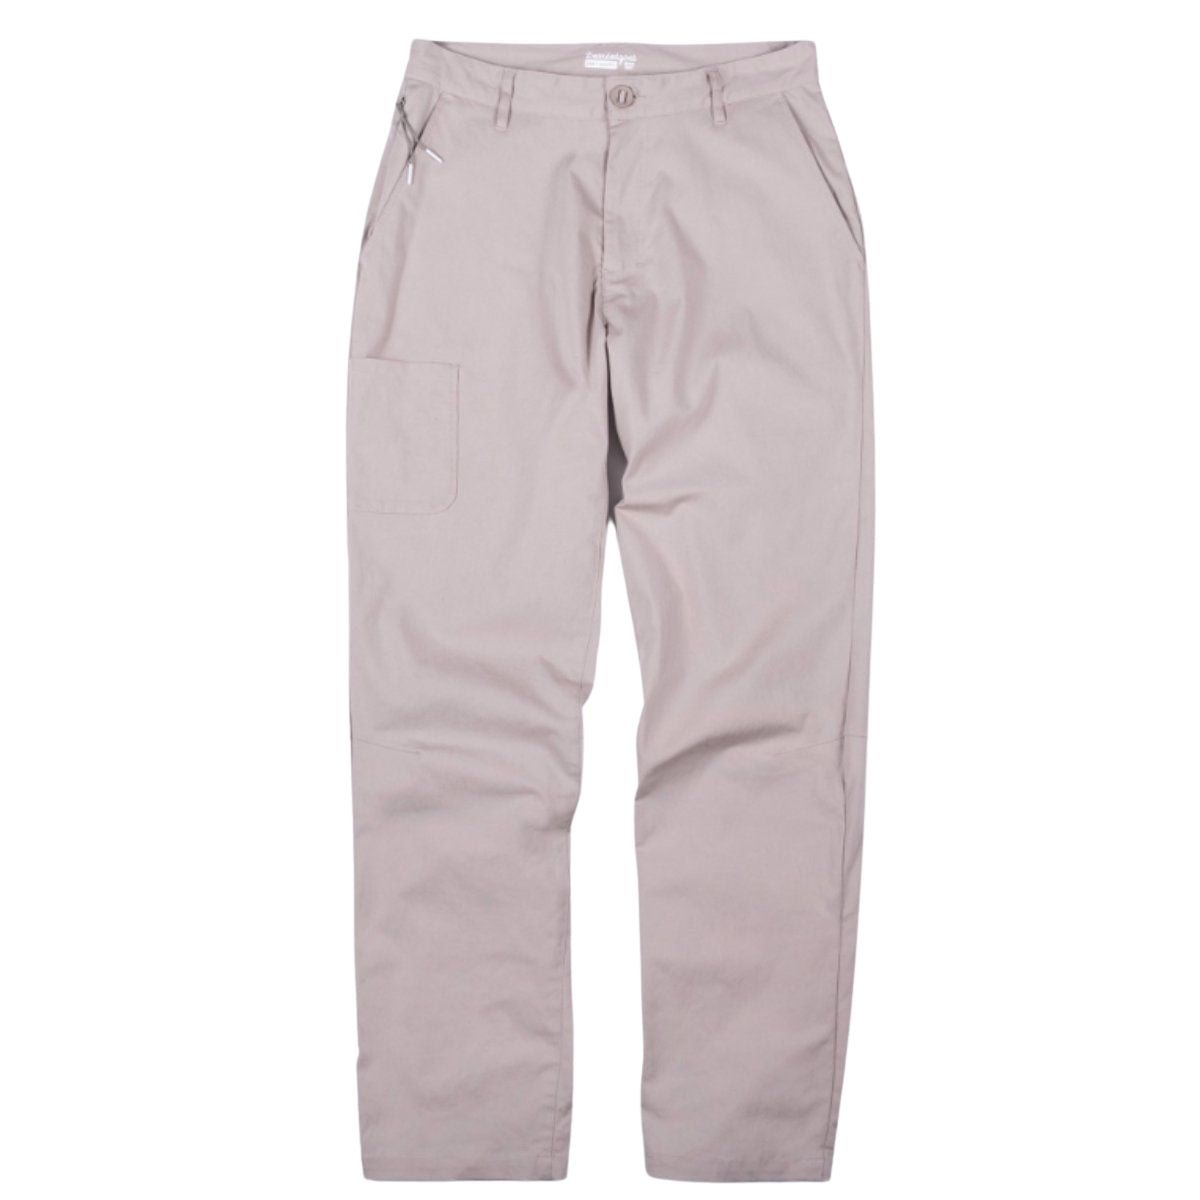 Bearded Goat Union Pant in Sand - BoardCo